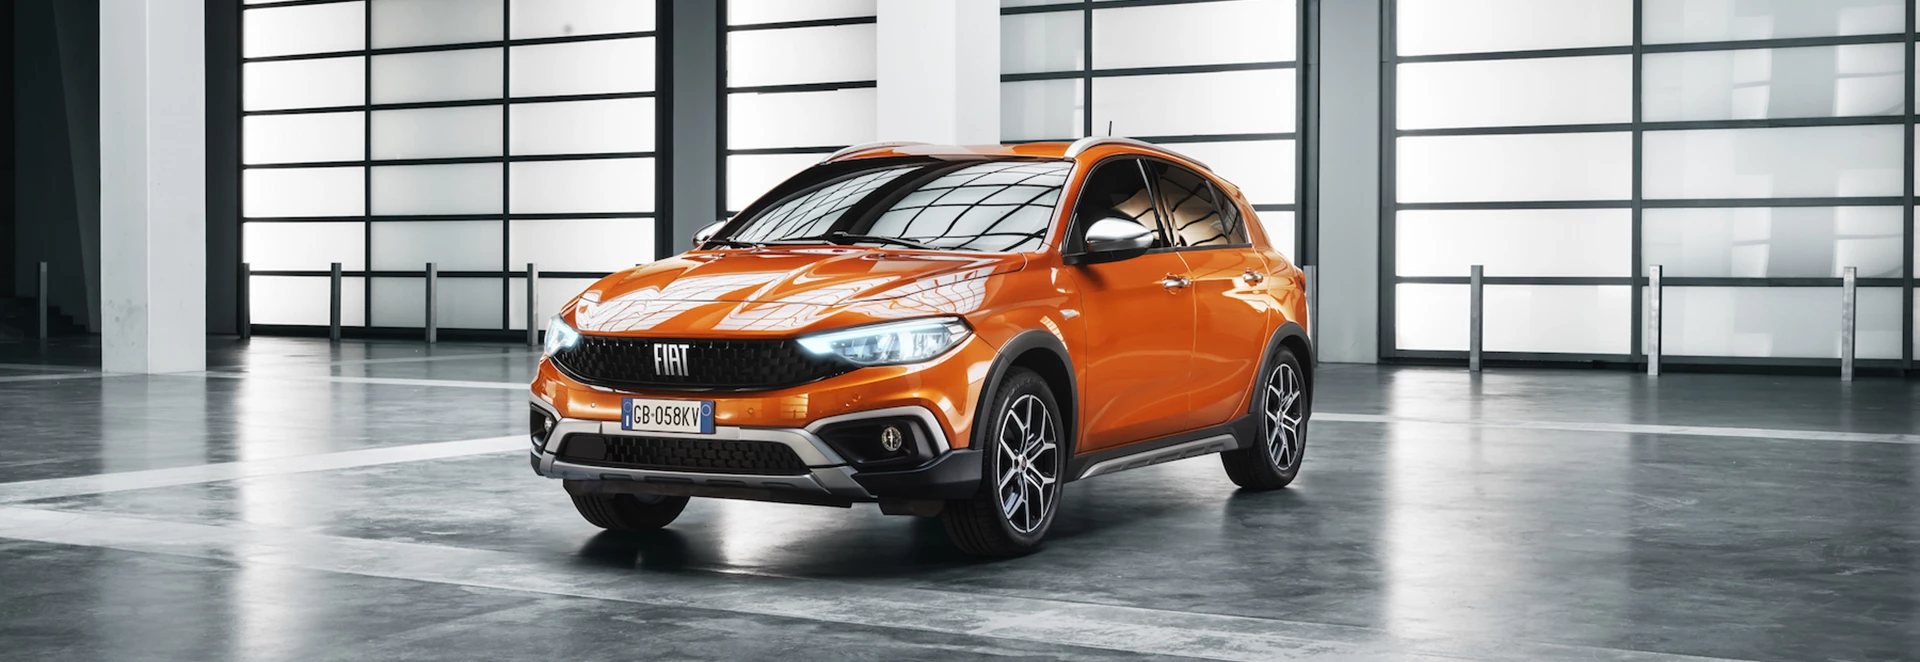 Fiat reveals updated Tipo range with new tech and rugged Cross model 